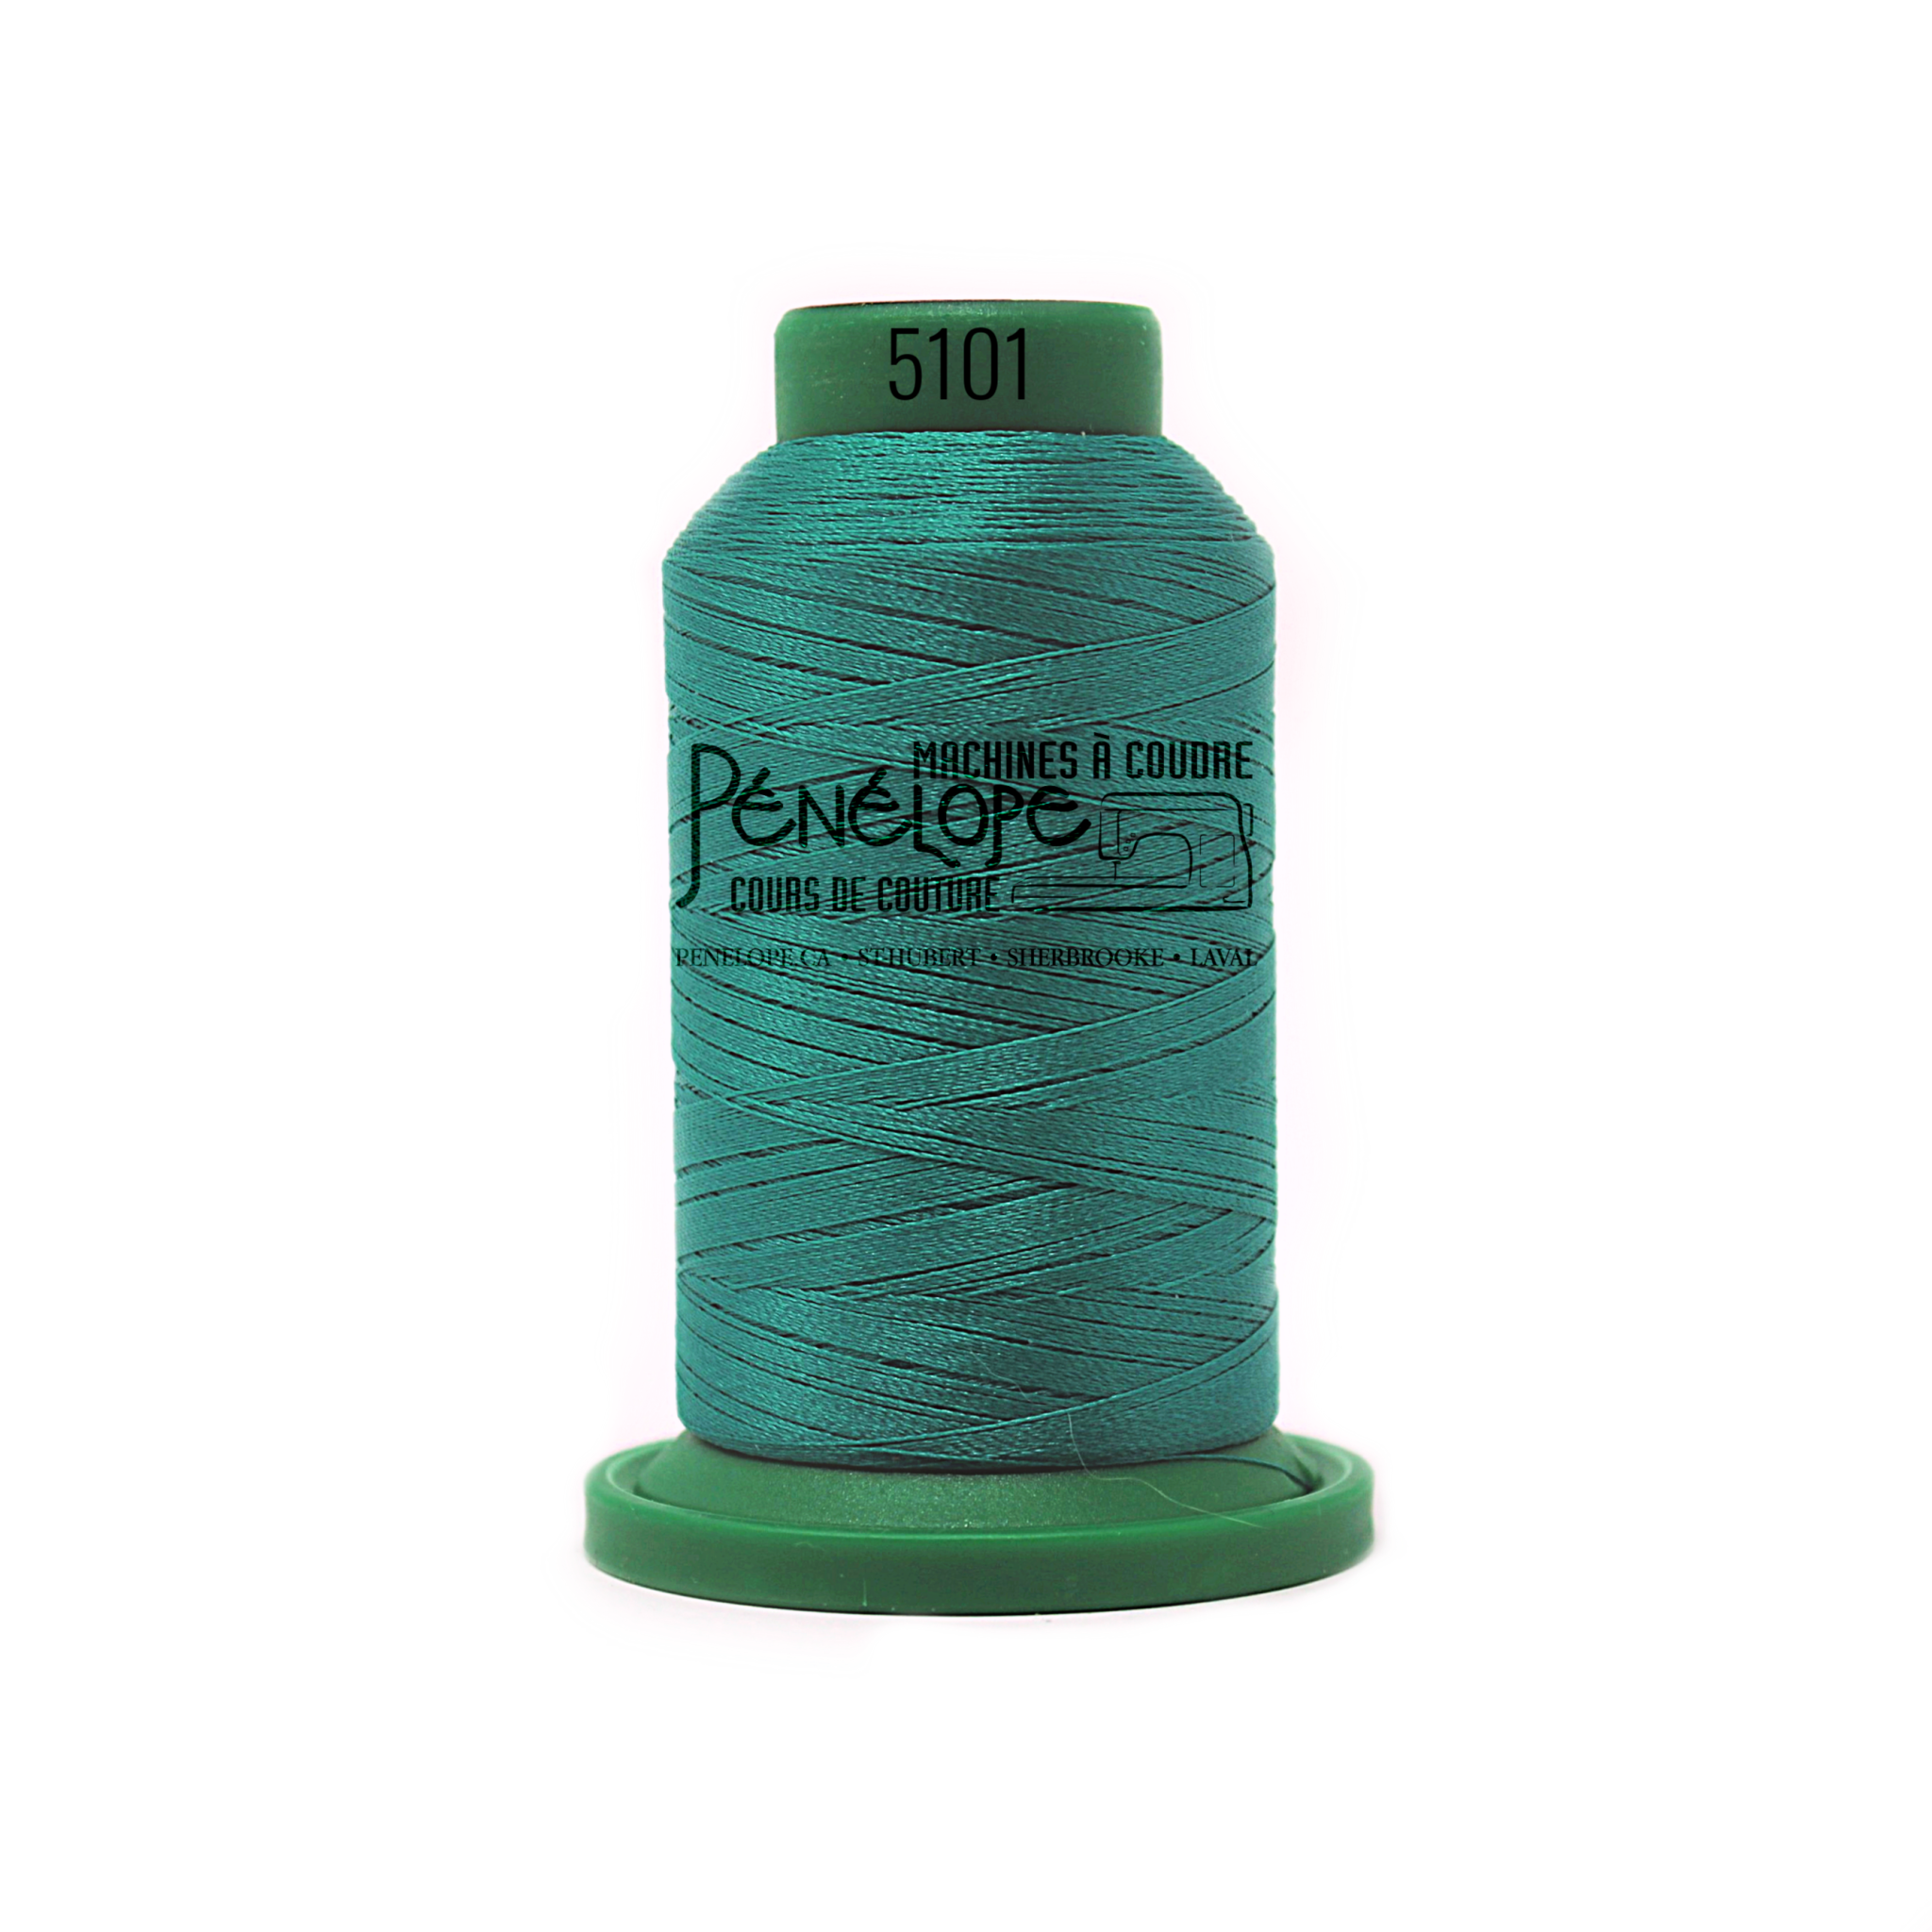 Isacord Isacord sewing and embroidery thread 5101